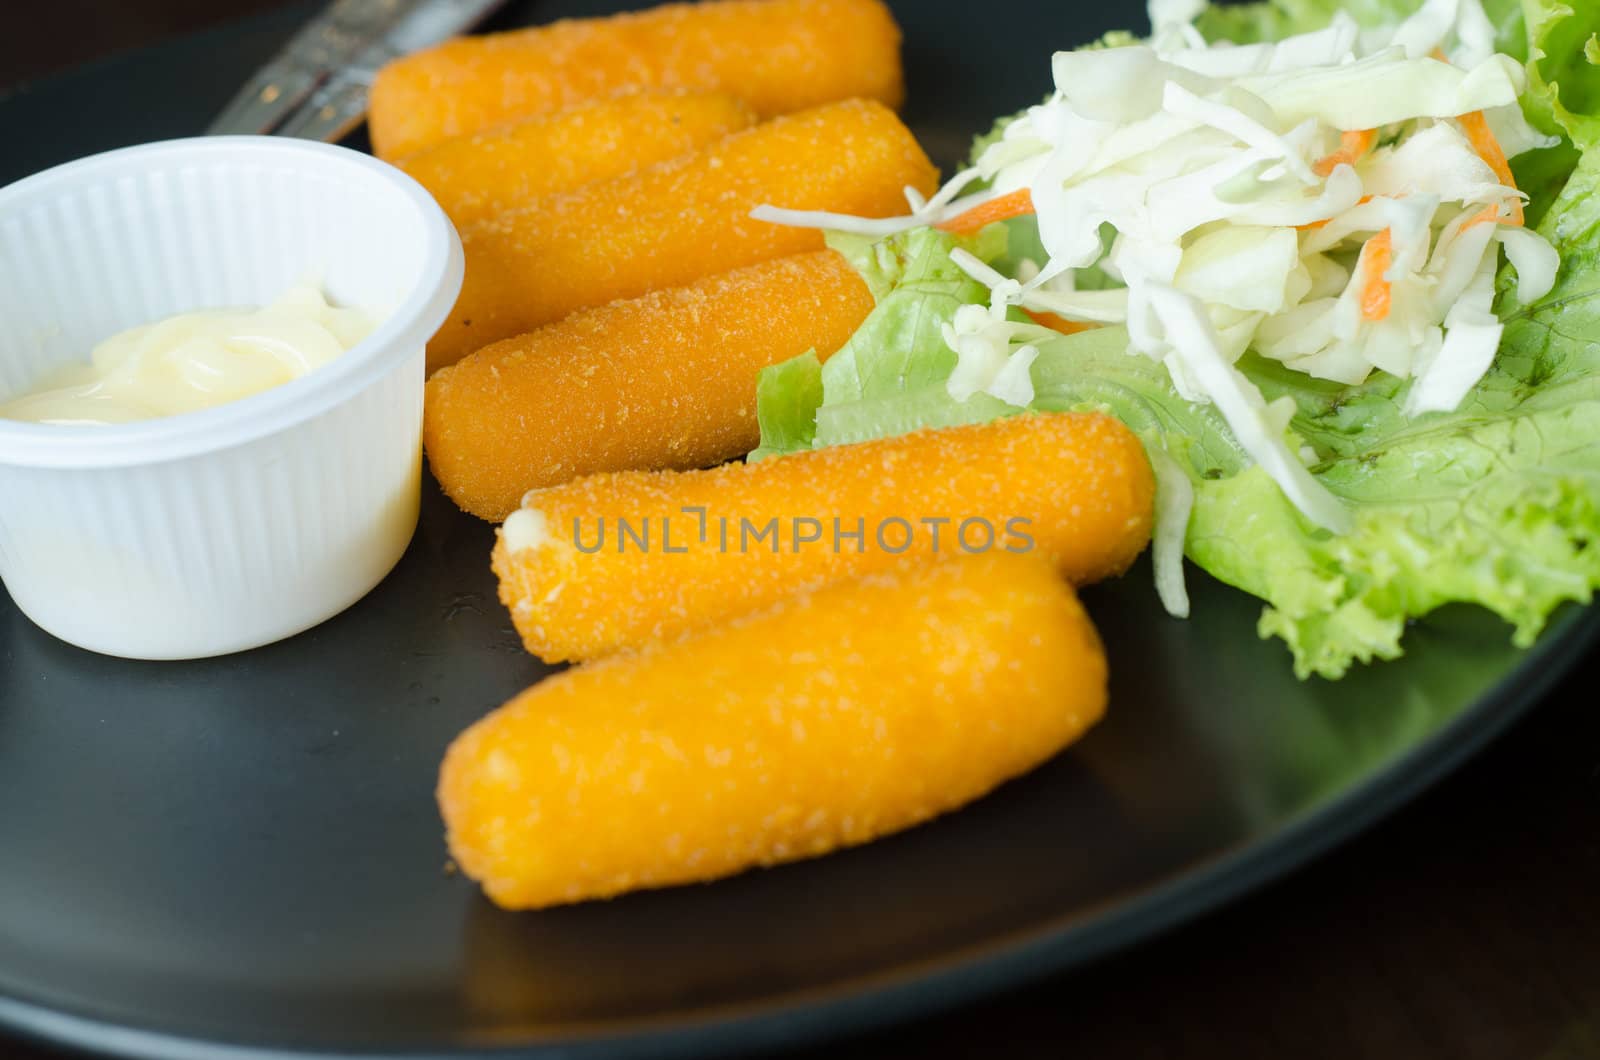 fried cheese with mustard served on dish in restaurant